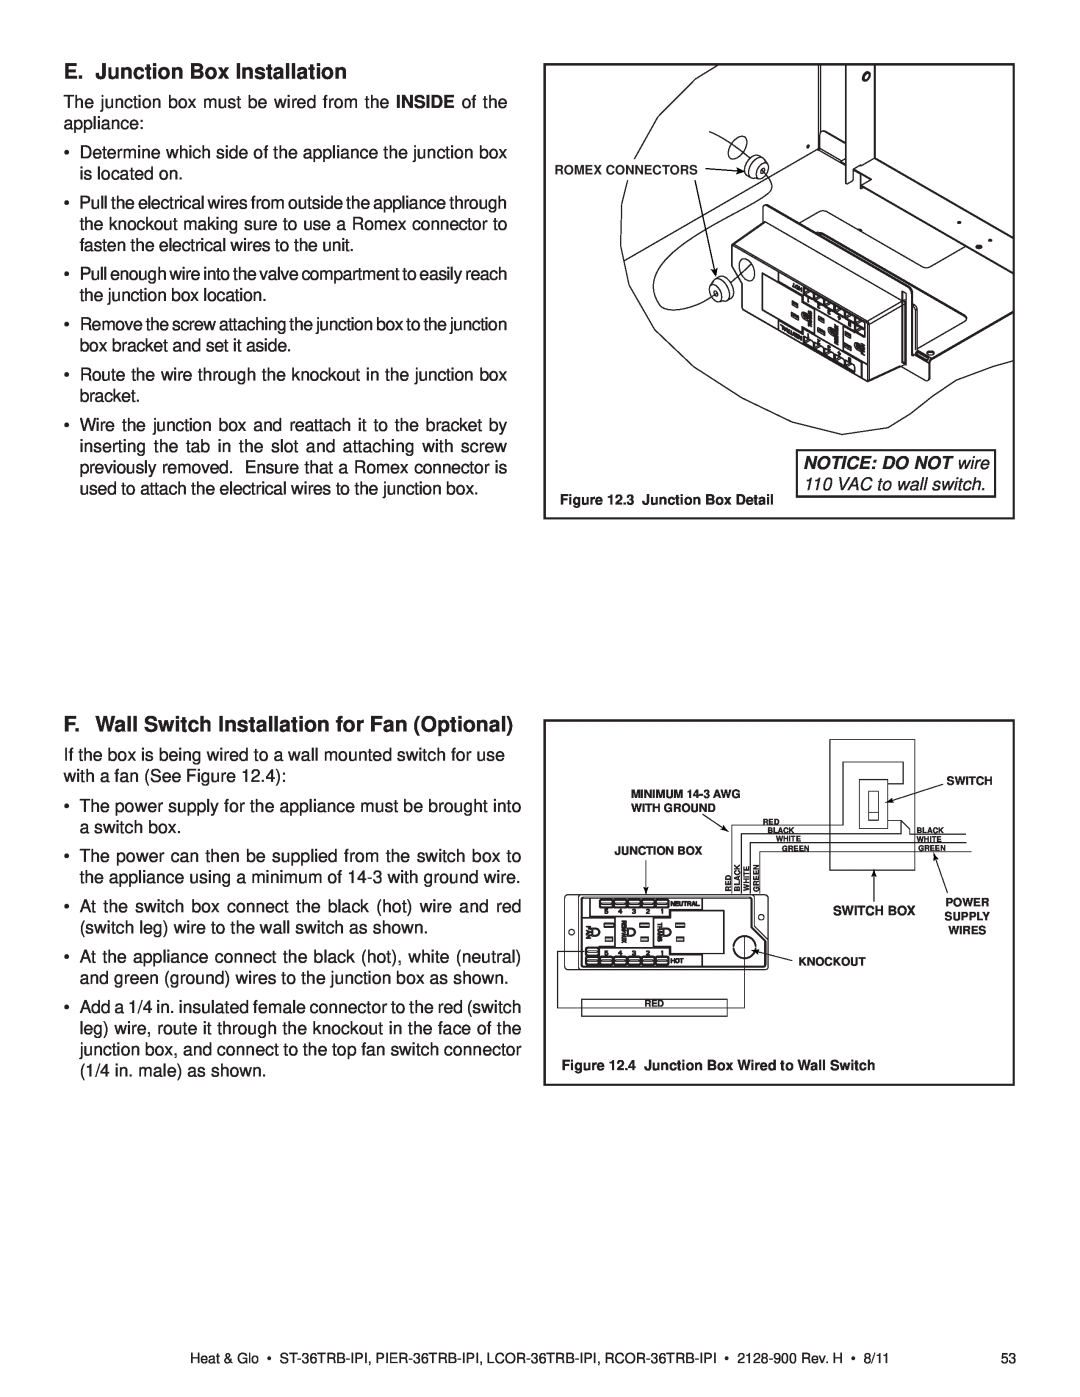 Heat & Glo LifeStyle ST-36TRB-IPI owner manual E. Junction Box Installation, F. Wall Switch Installation for Fan Optional 